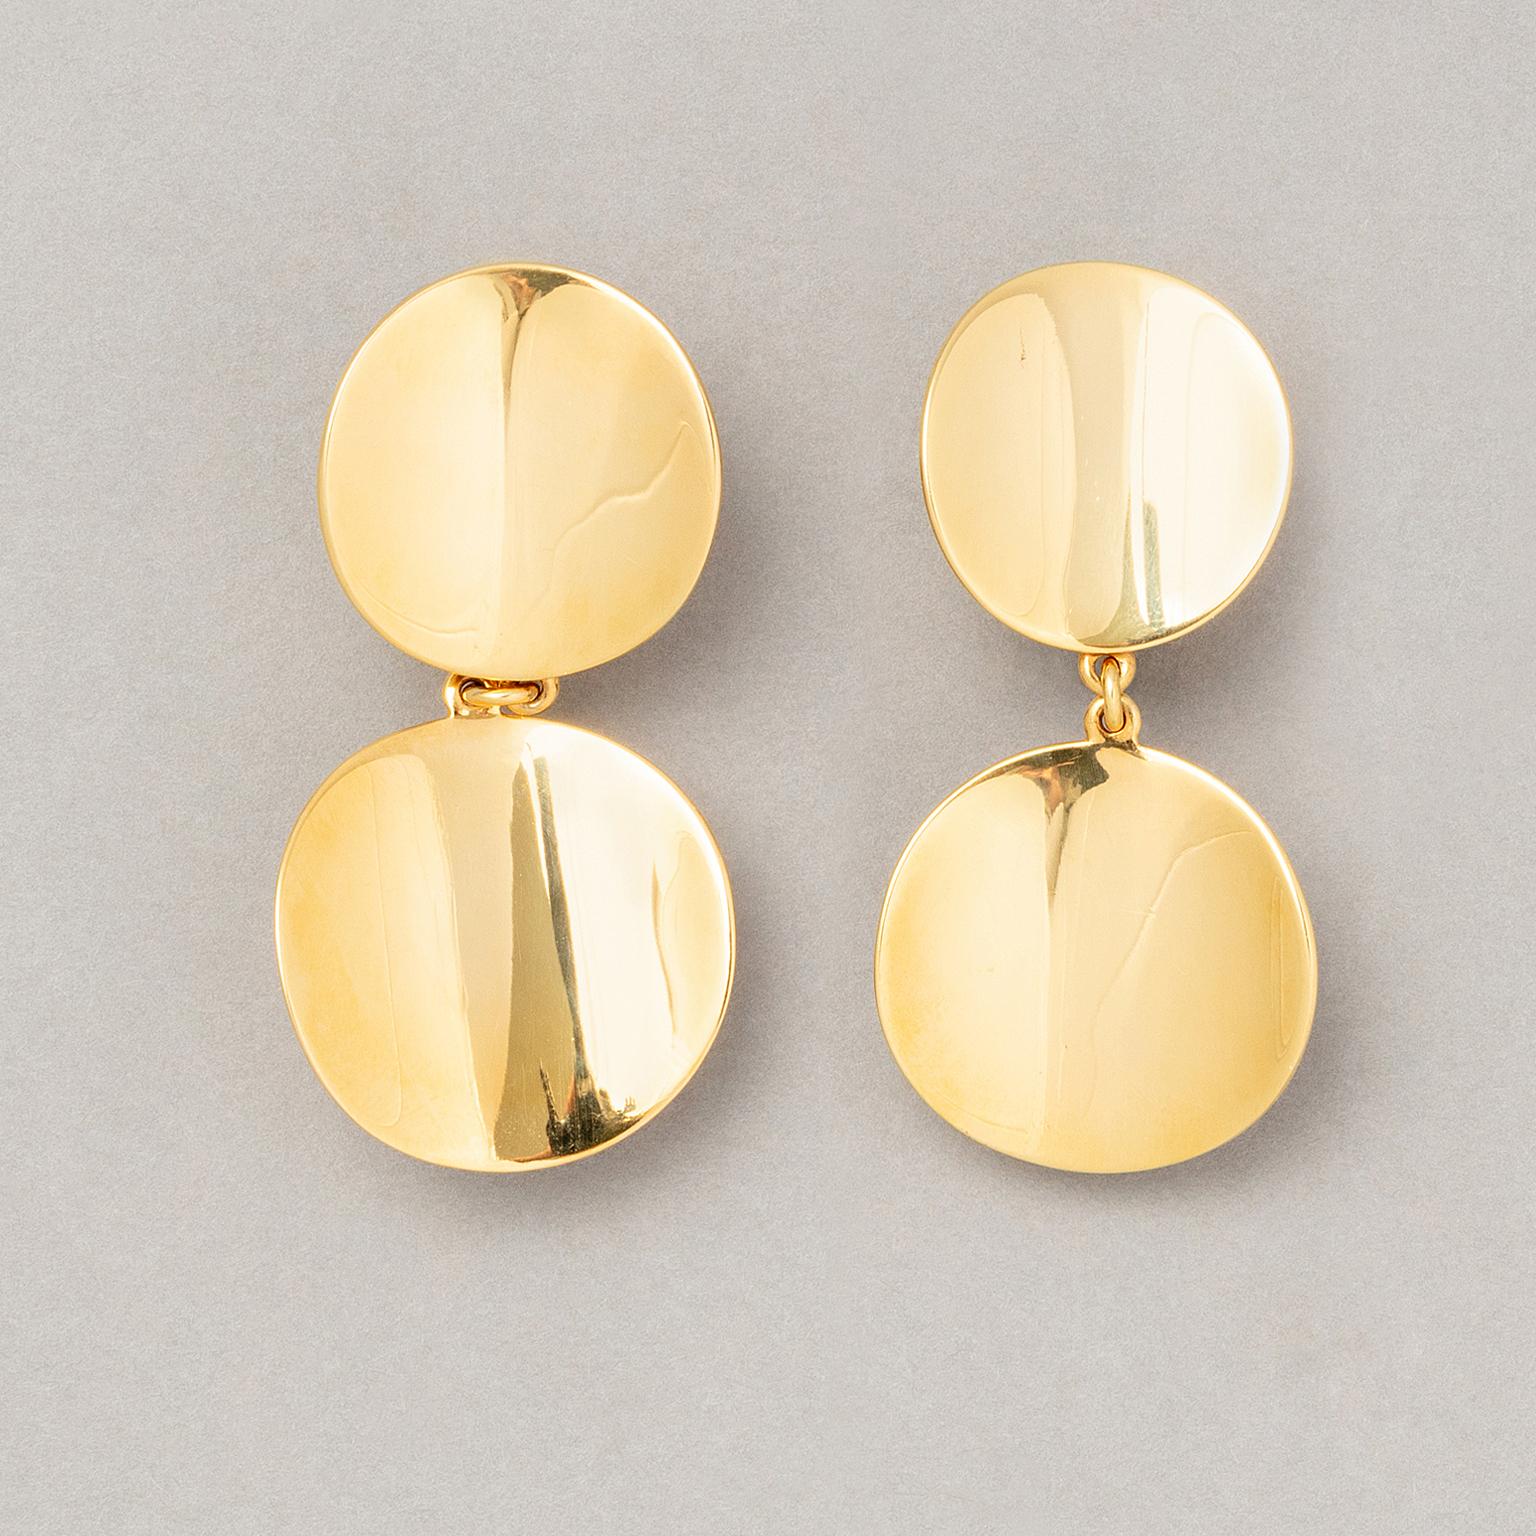 A pair of 18 carat gold earrings with large concave cirlces, signed: Sabbadini, circa 1970.

weight: 26.10 grams
dimensions: 5 x 2.4 cm.